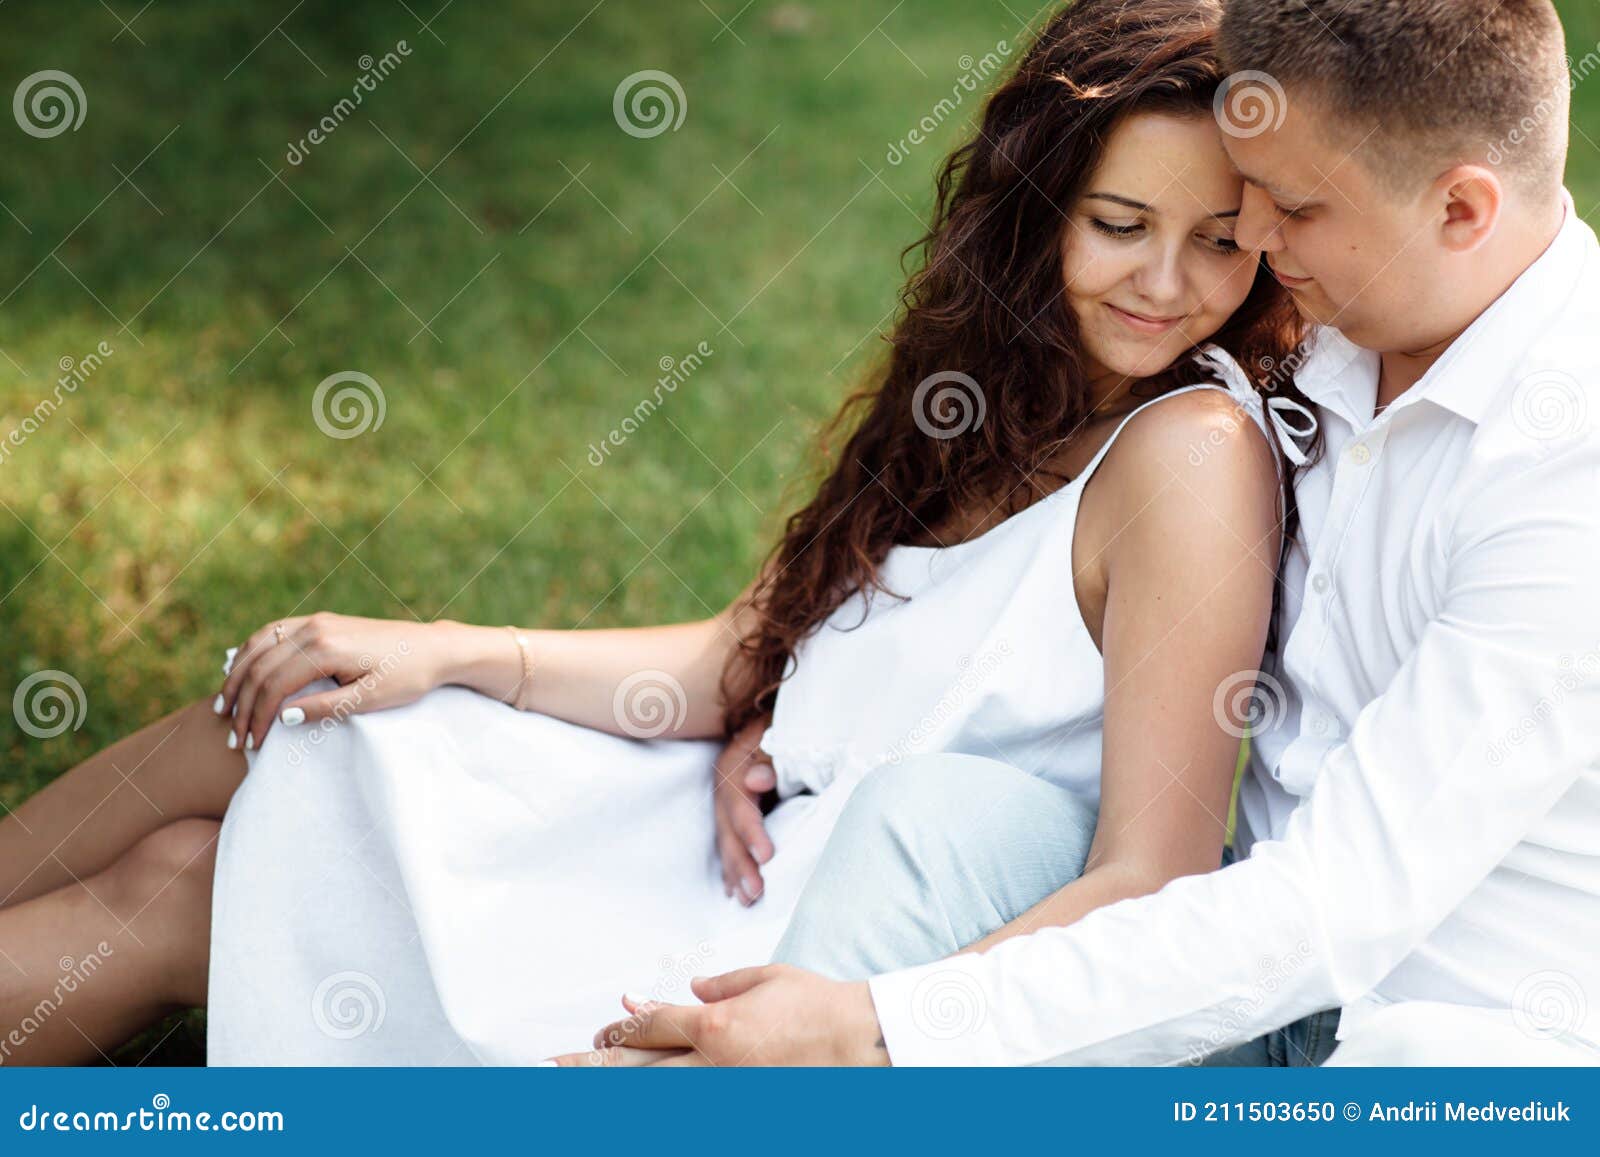 Young Loving Couple is Sitting on Grass in the Park, Hugging